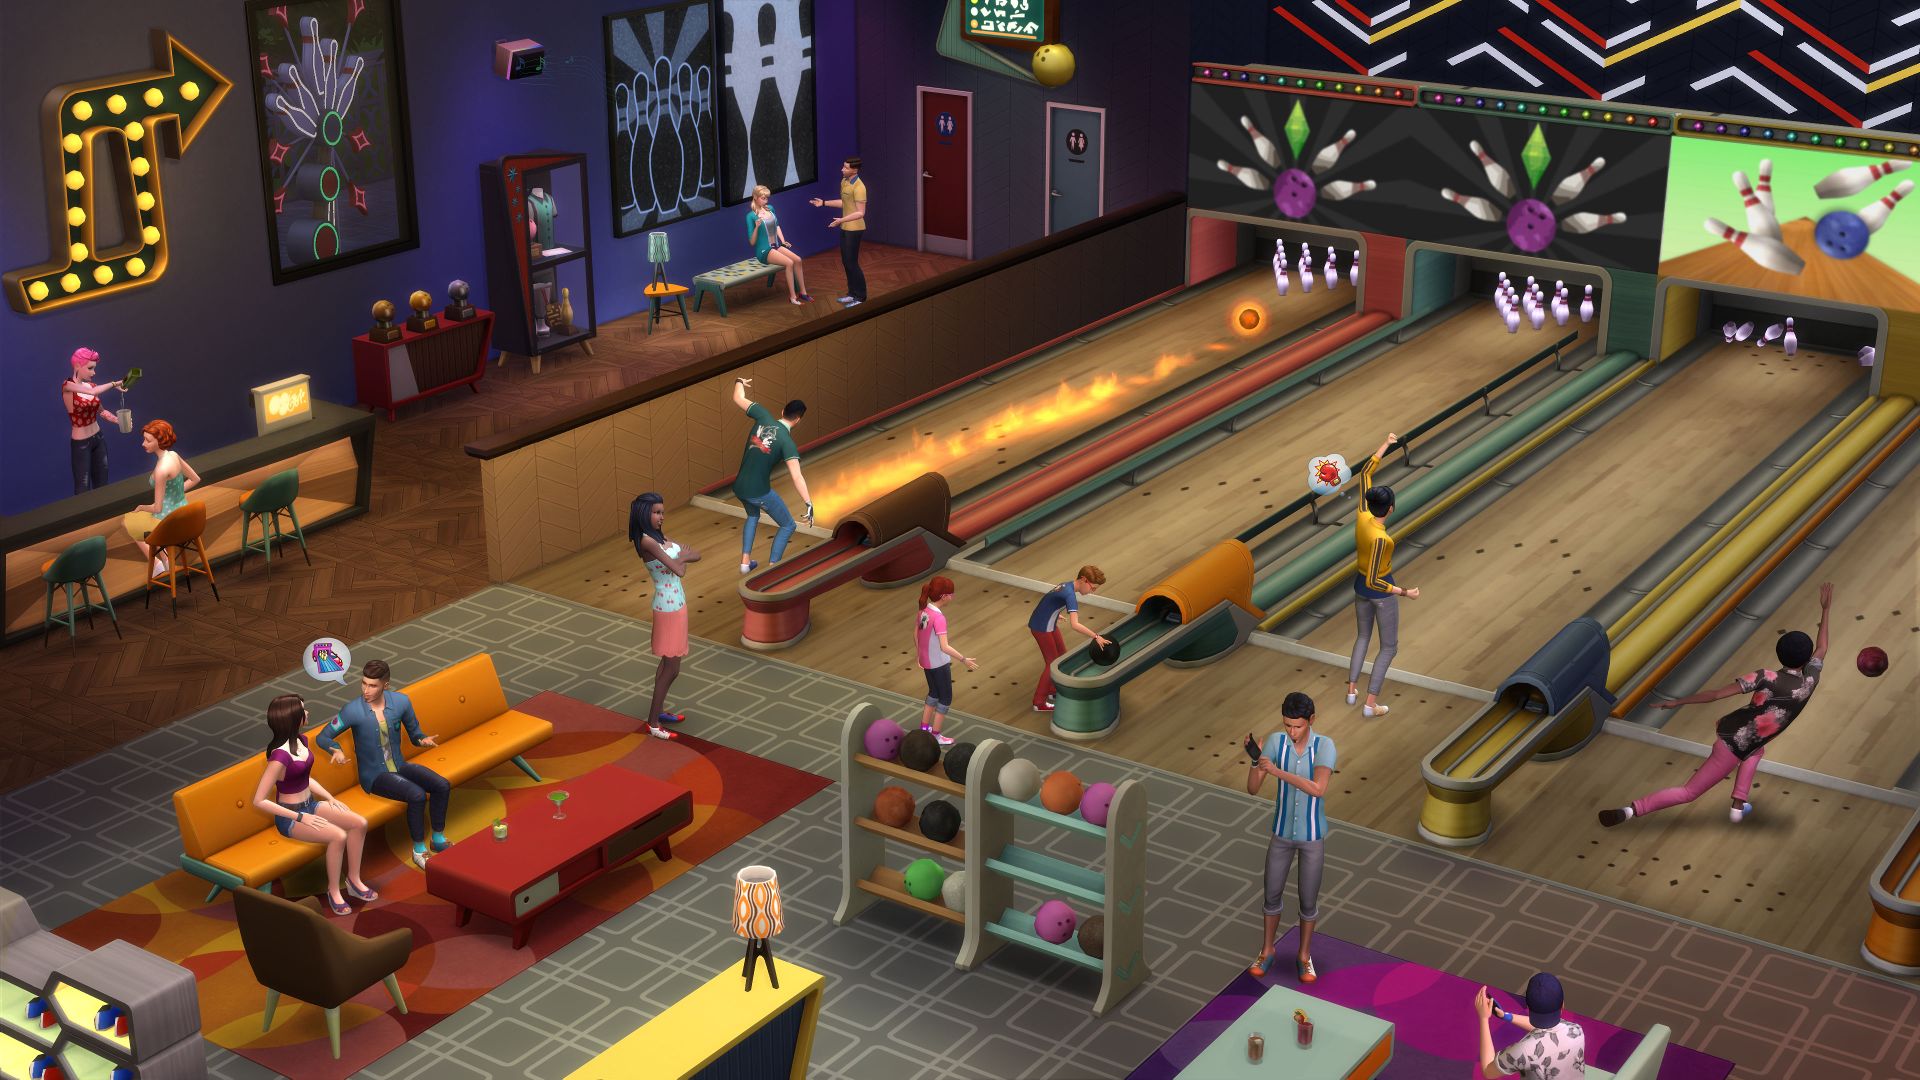 The Sims 4 Bowling Night Features